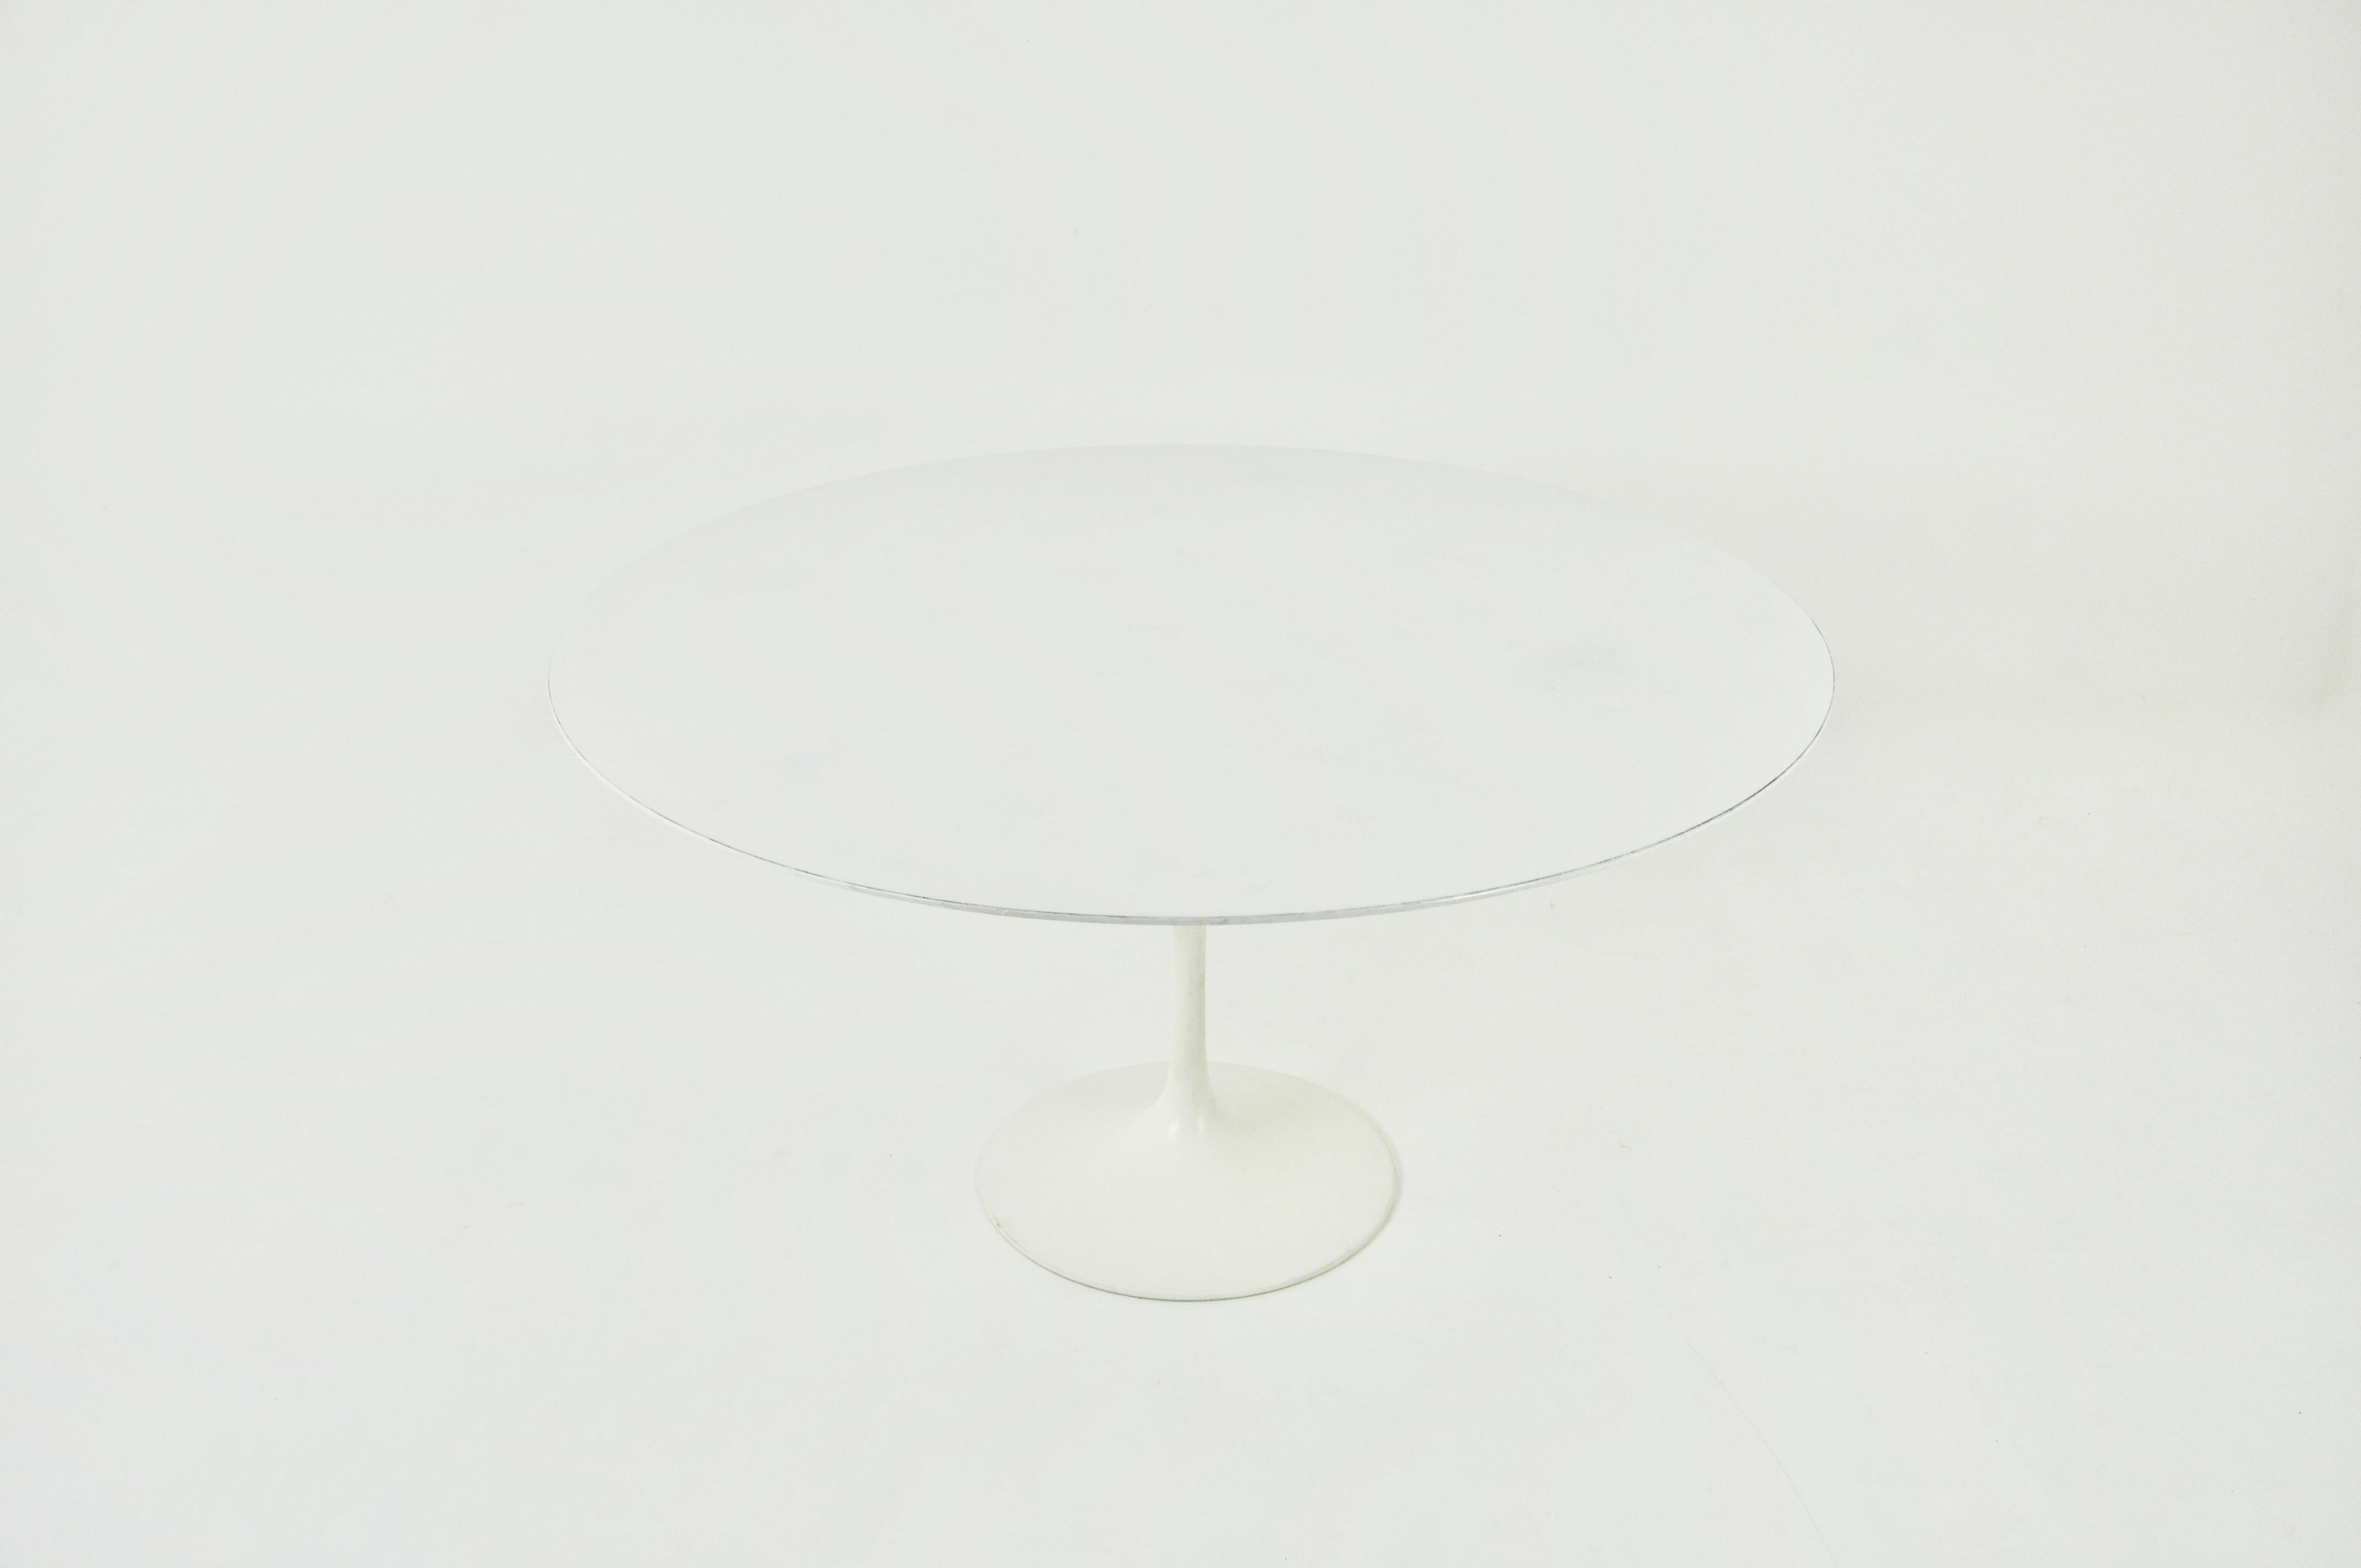 Round table in white laminated wood with aluminium base designed by Eero Saarinen and produced by Knoll International. Leg stamped Knoll International. Wear due to time and age of the table.